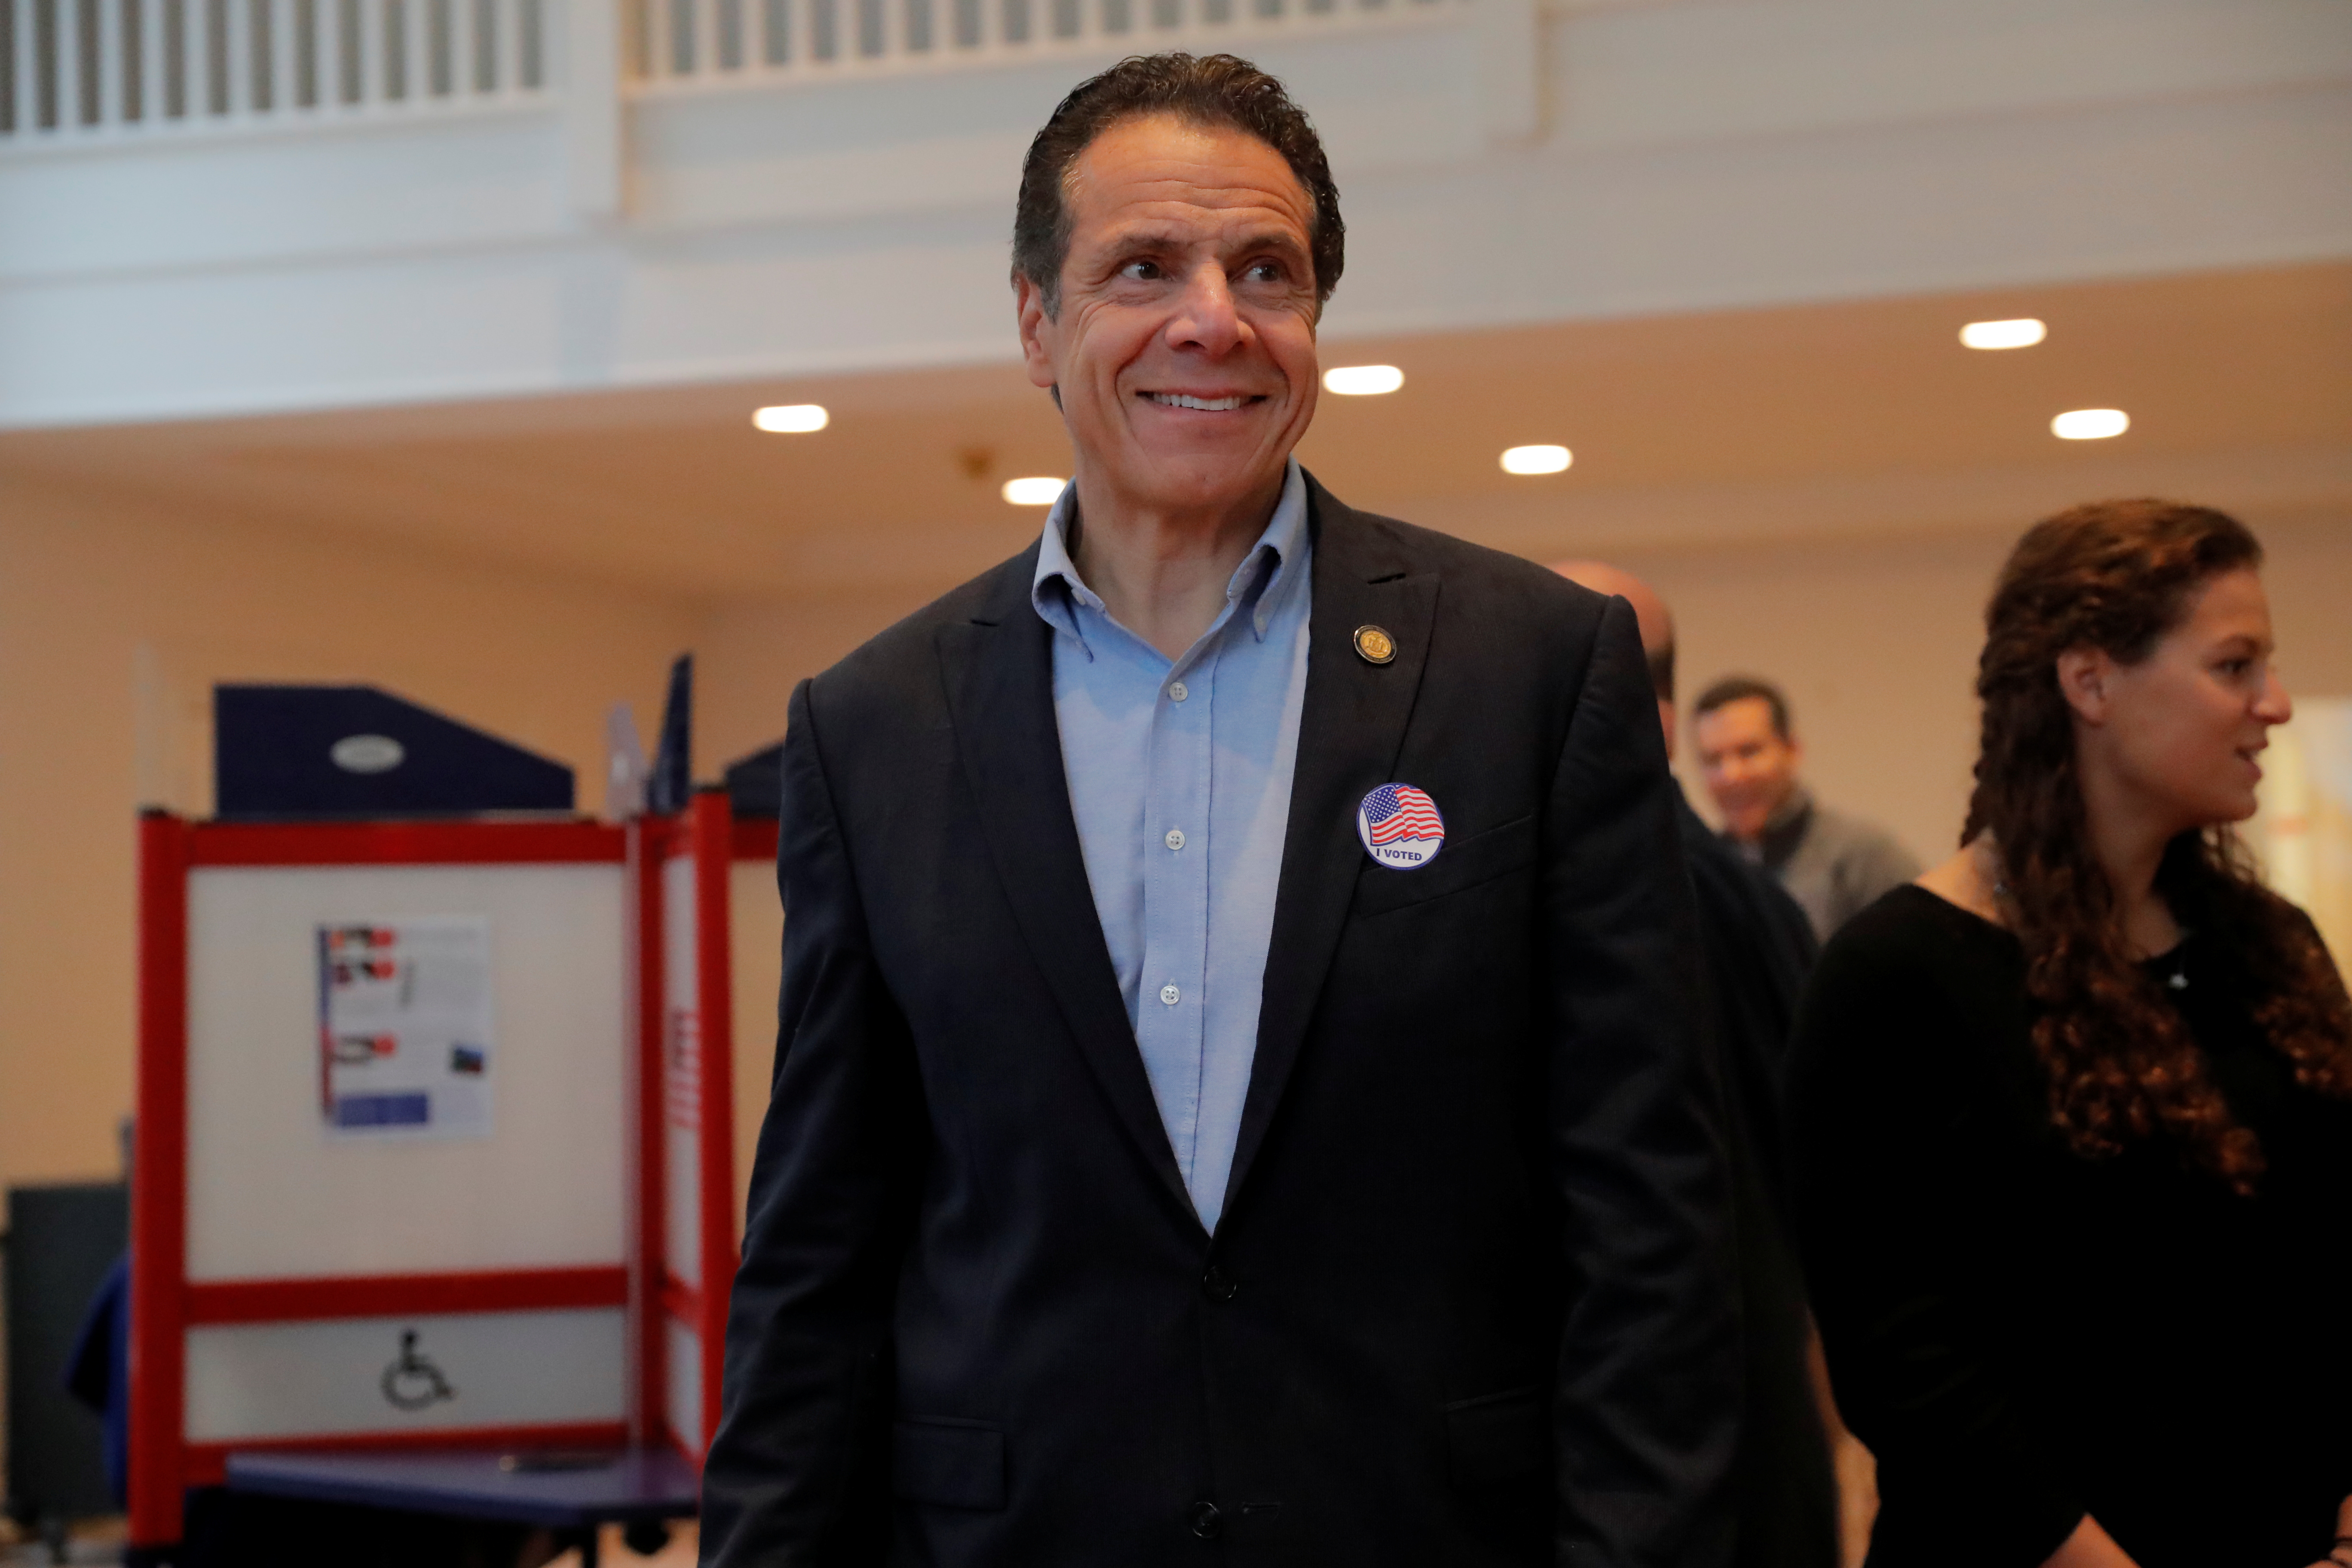 Democratic New York Governor Andrew Cuomo smiles wearing an I voted sticker after casting his vote at the Presbyterian Church in Mt. Kisco, New York, U.S., November 6, 2018. REUTERS/Caitlin Ochs